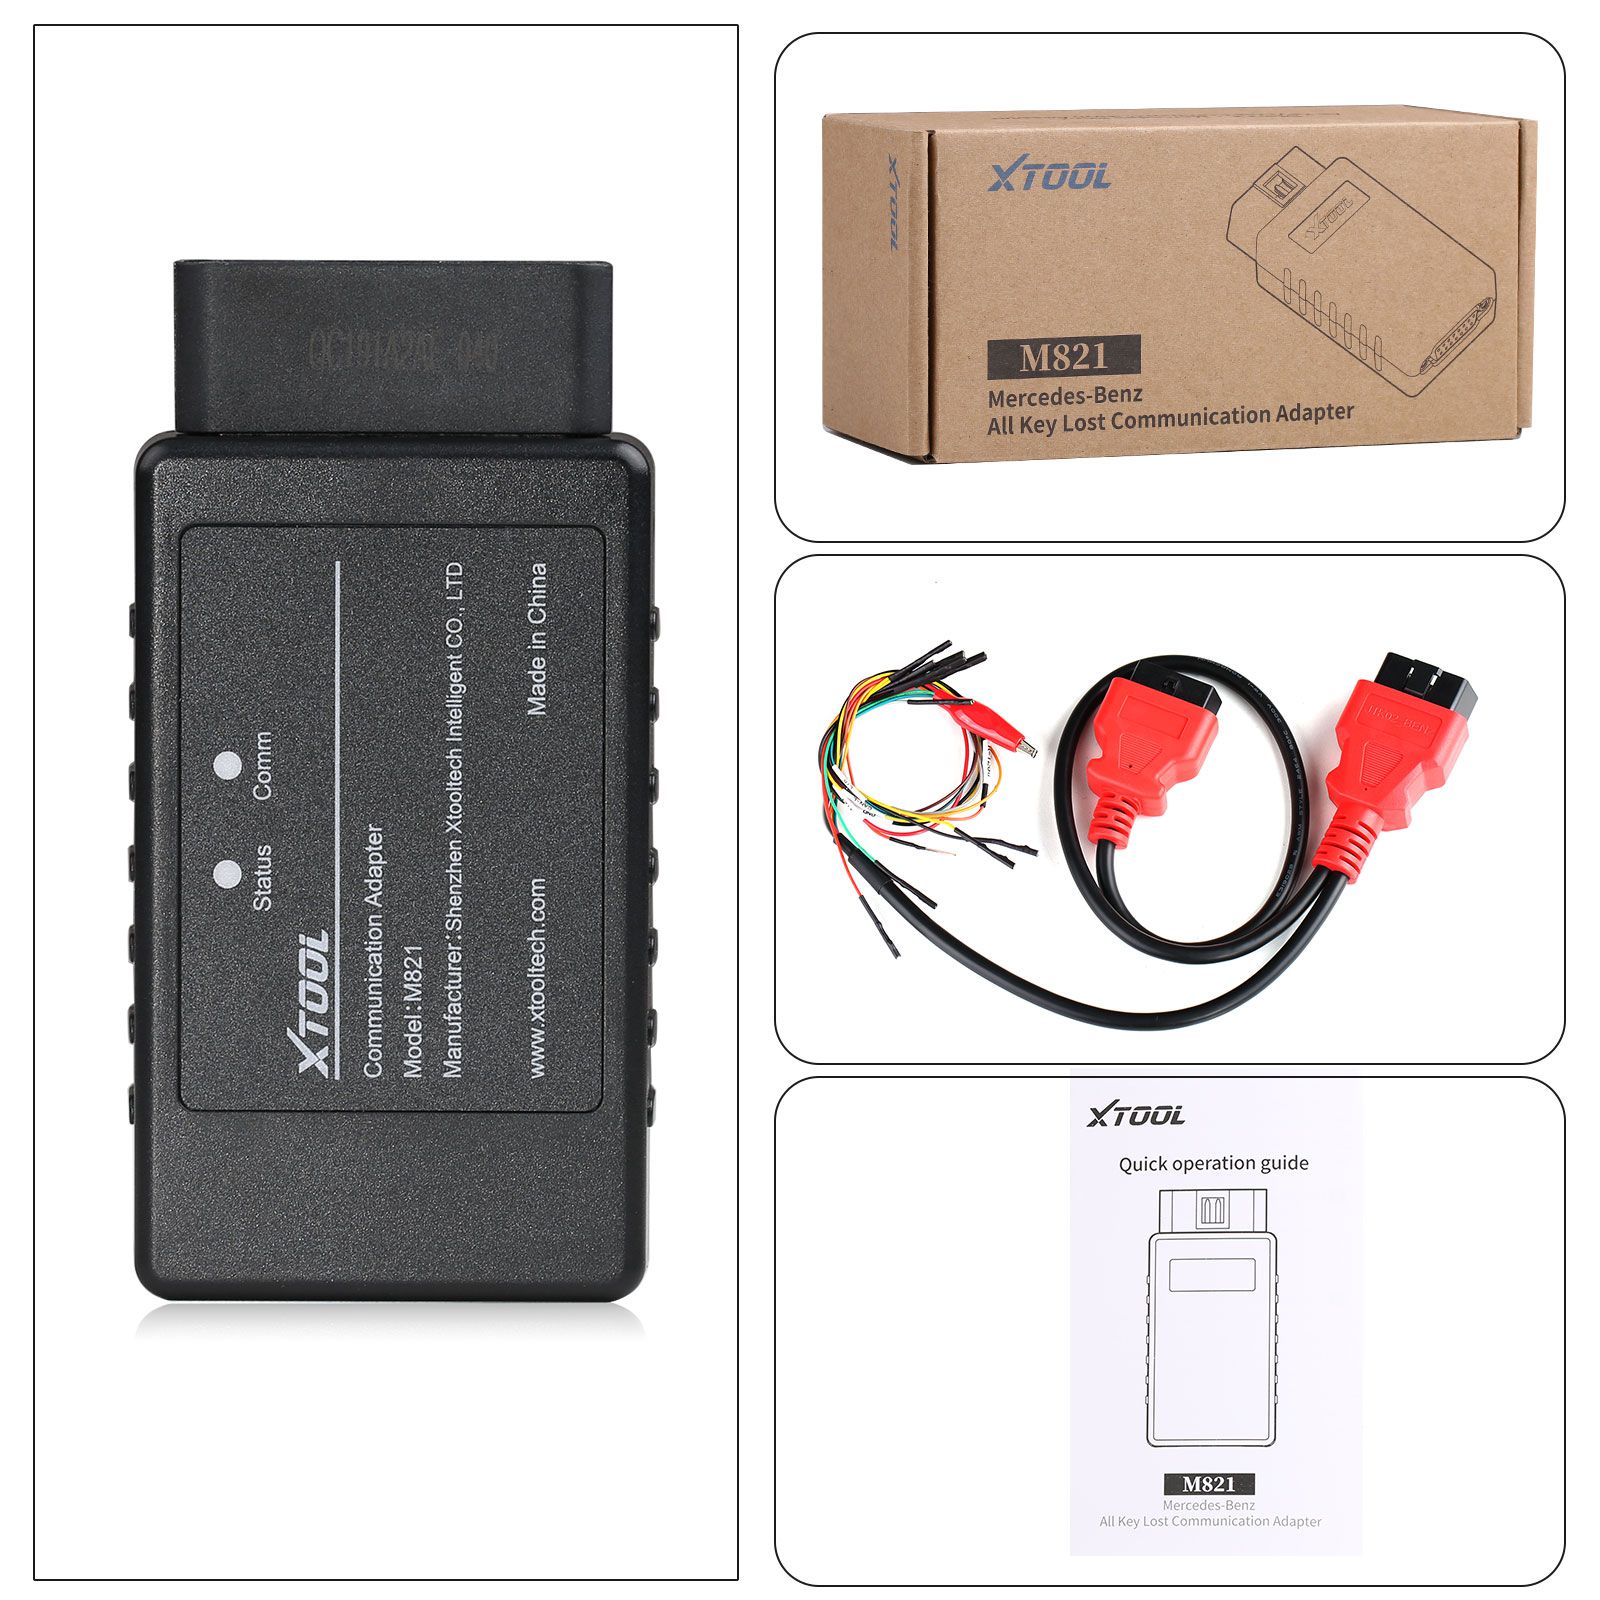 XTOOL M821 Adapter Work with KC501/X100 Pad3/X100 Max Key Programmer For Mercedes-Benz All Keys Lost